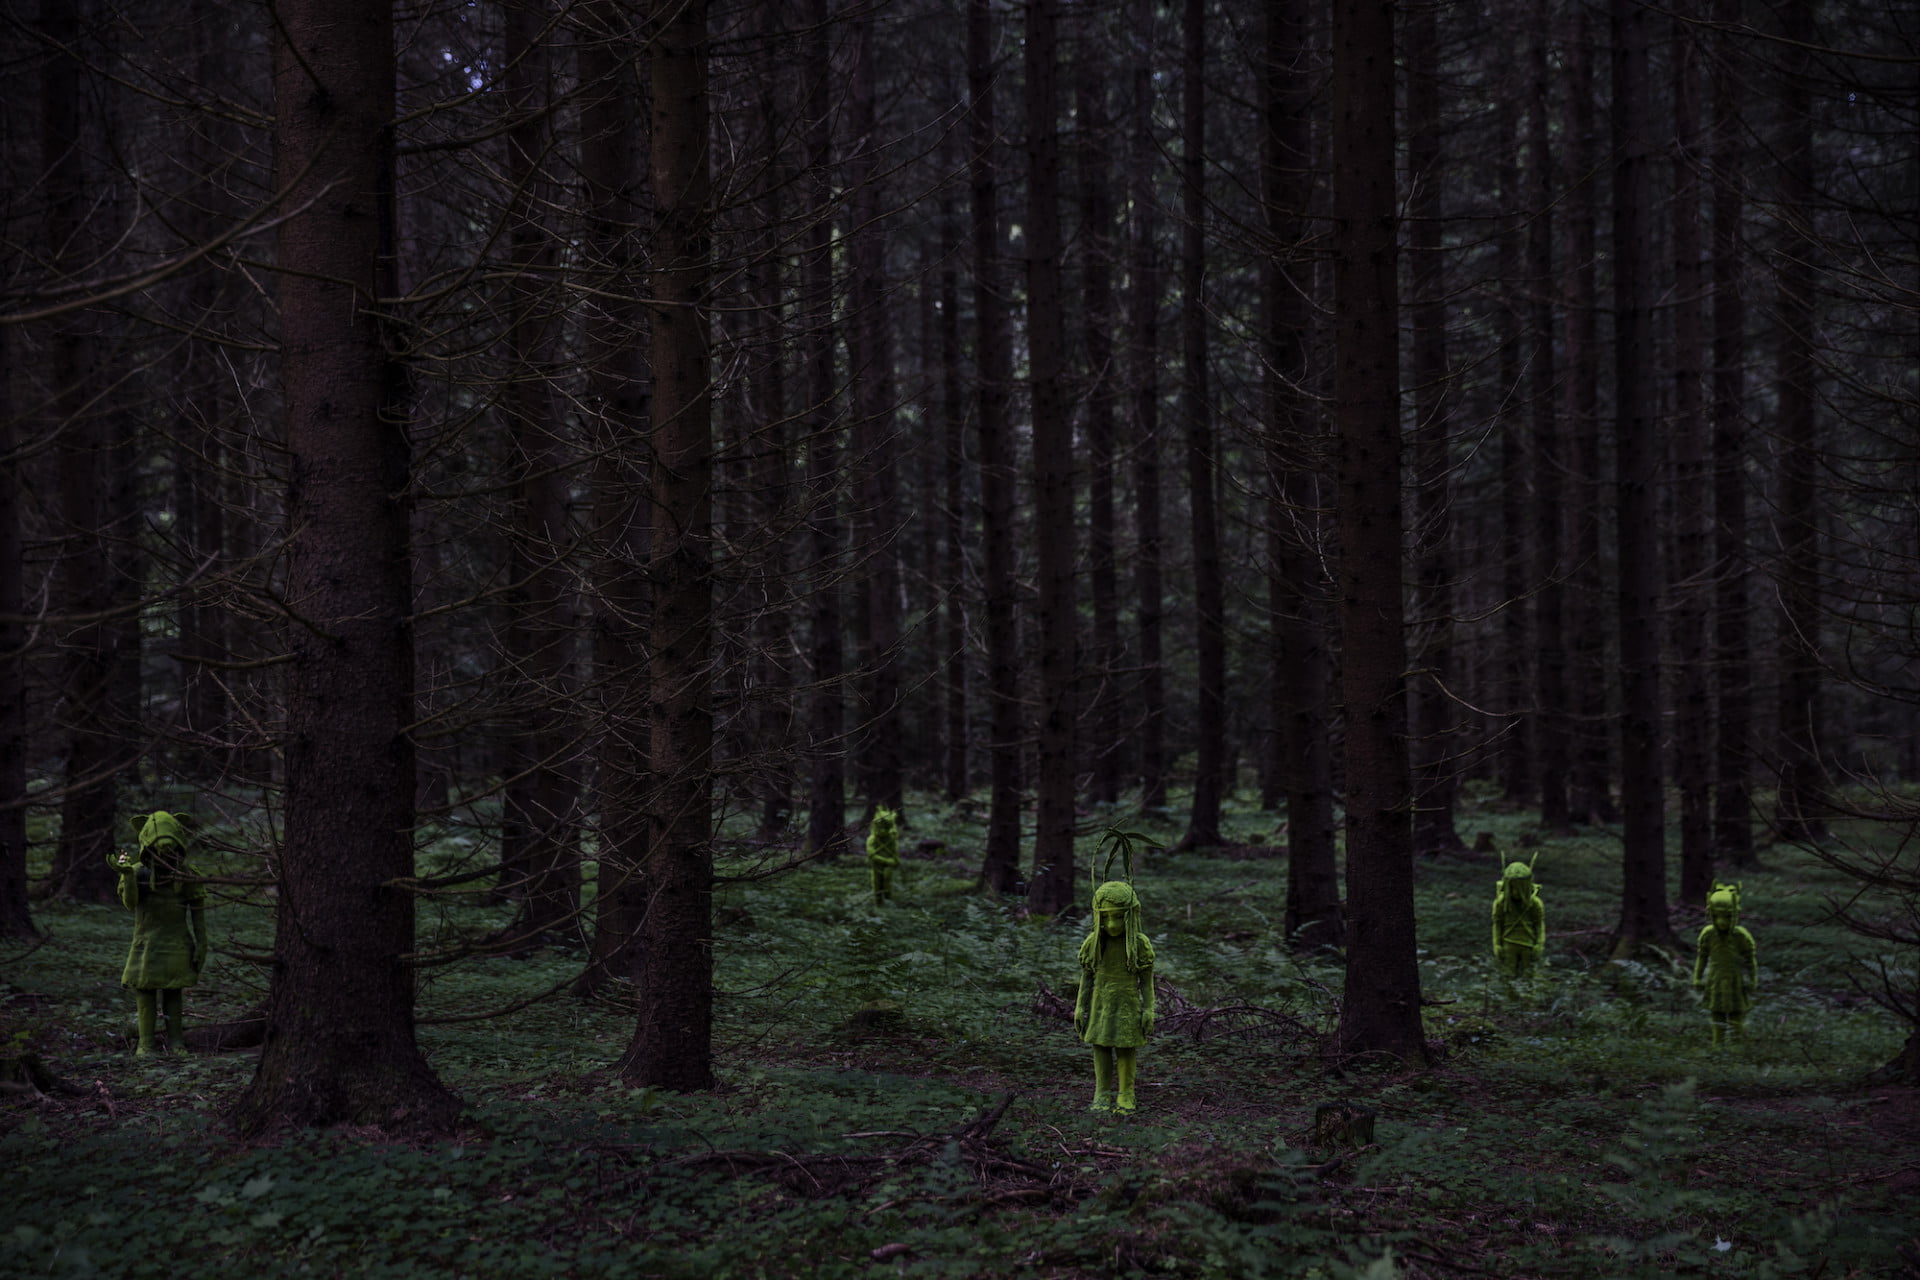 A photograph of ceramic figures that look like they are coated in moss, standing in a dense woodland.